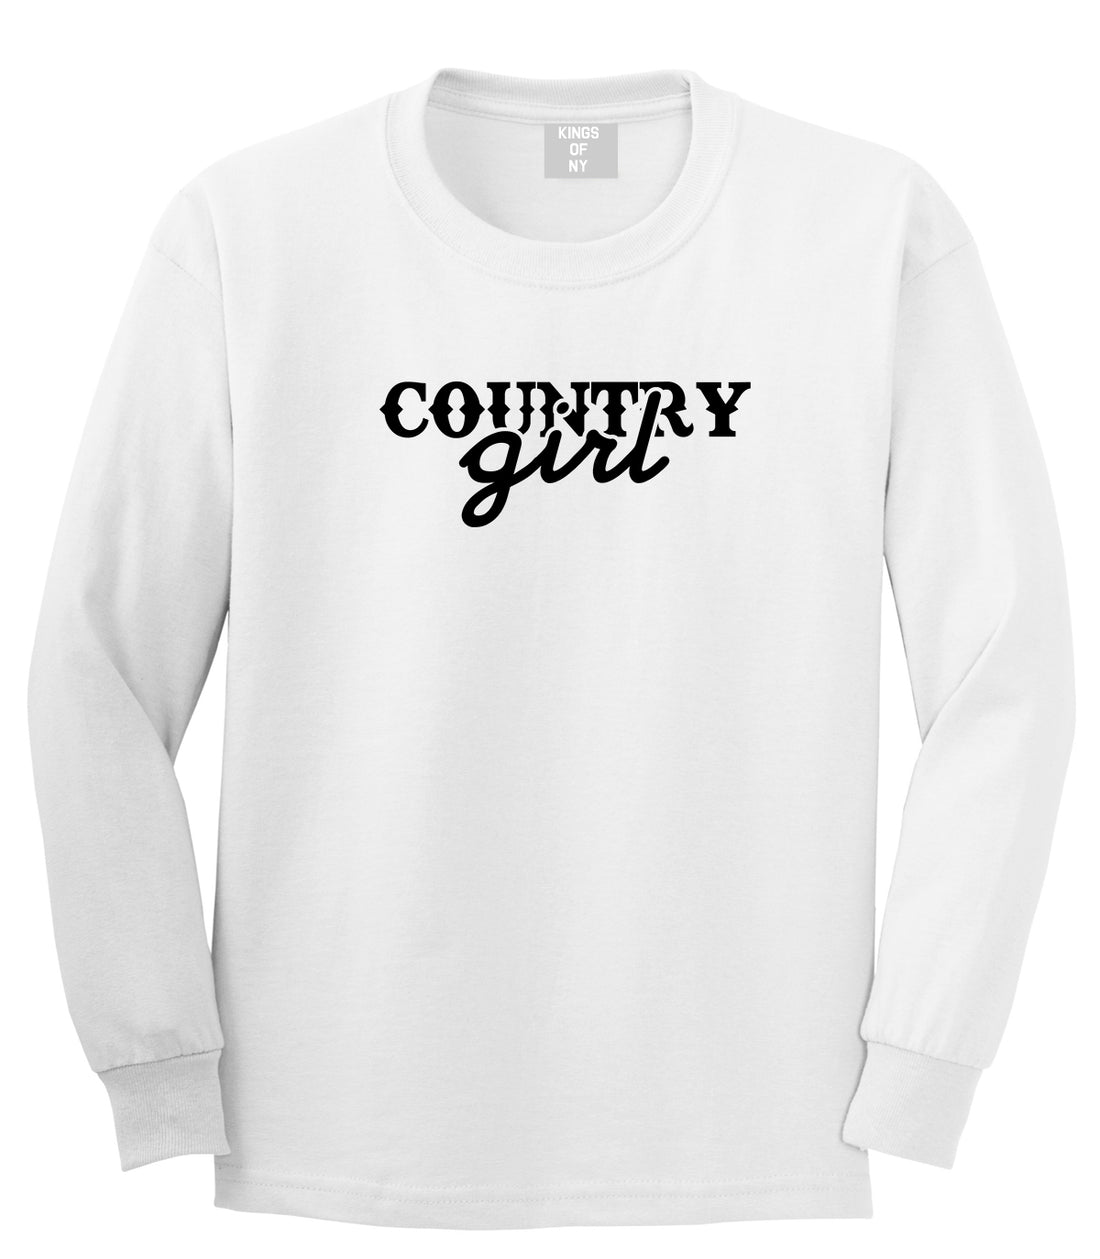 Country Girl White Long Sleeve T-Shirt by Kings Of NY